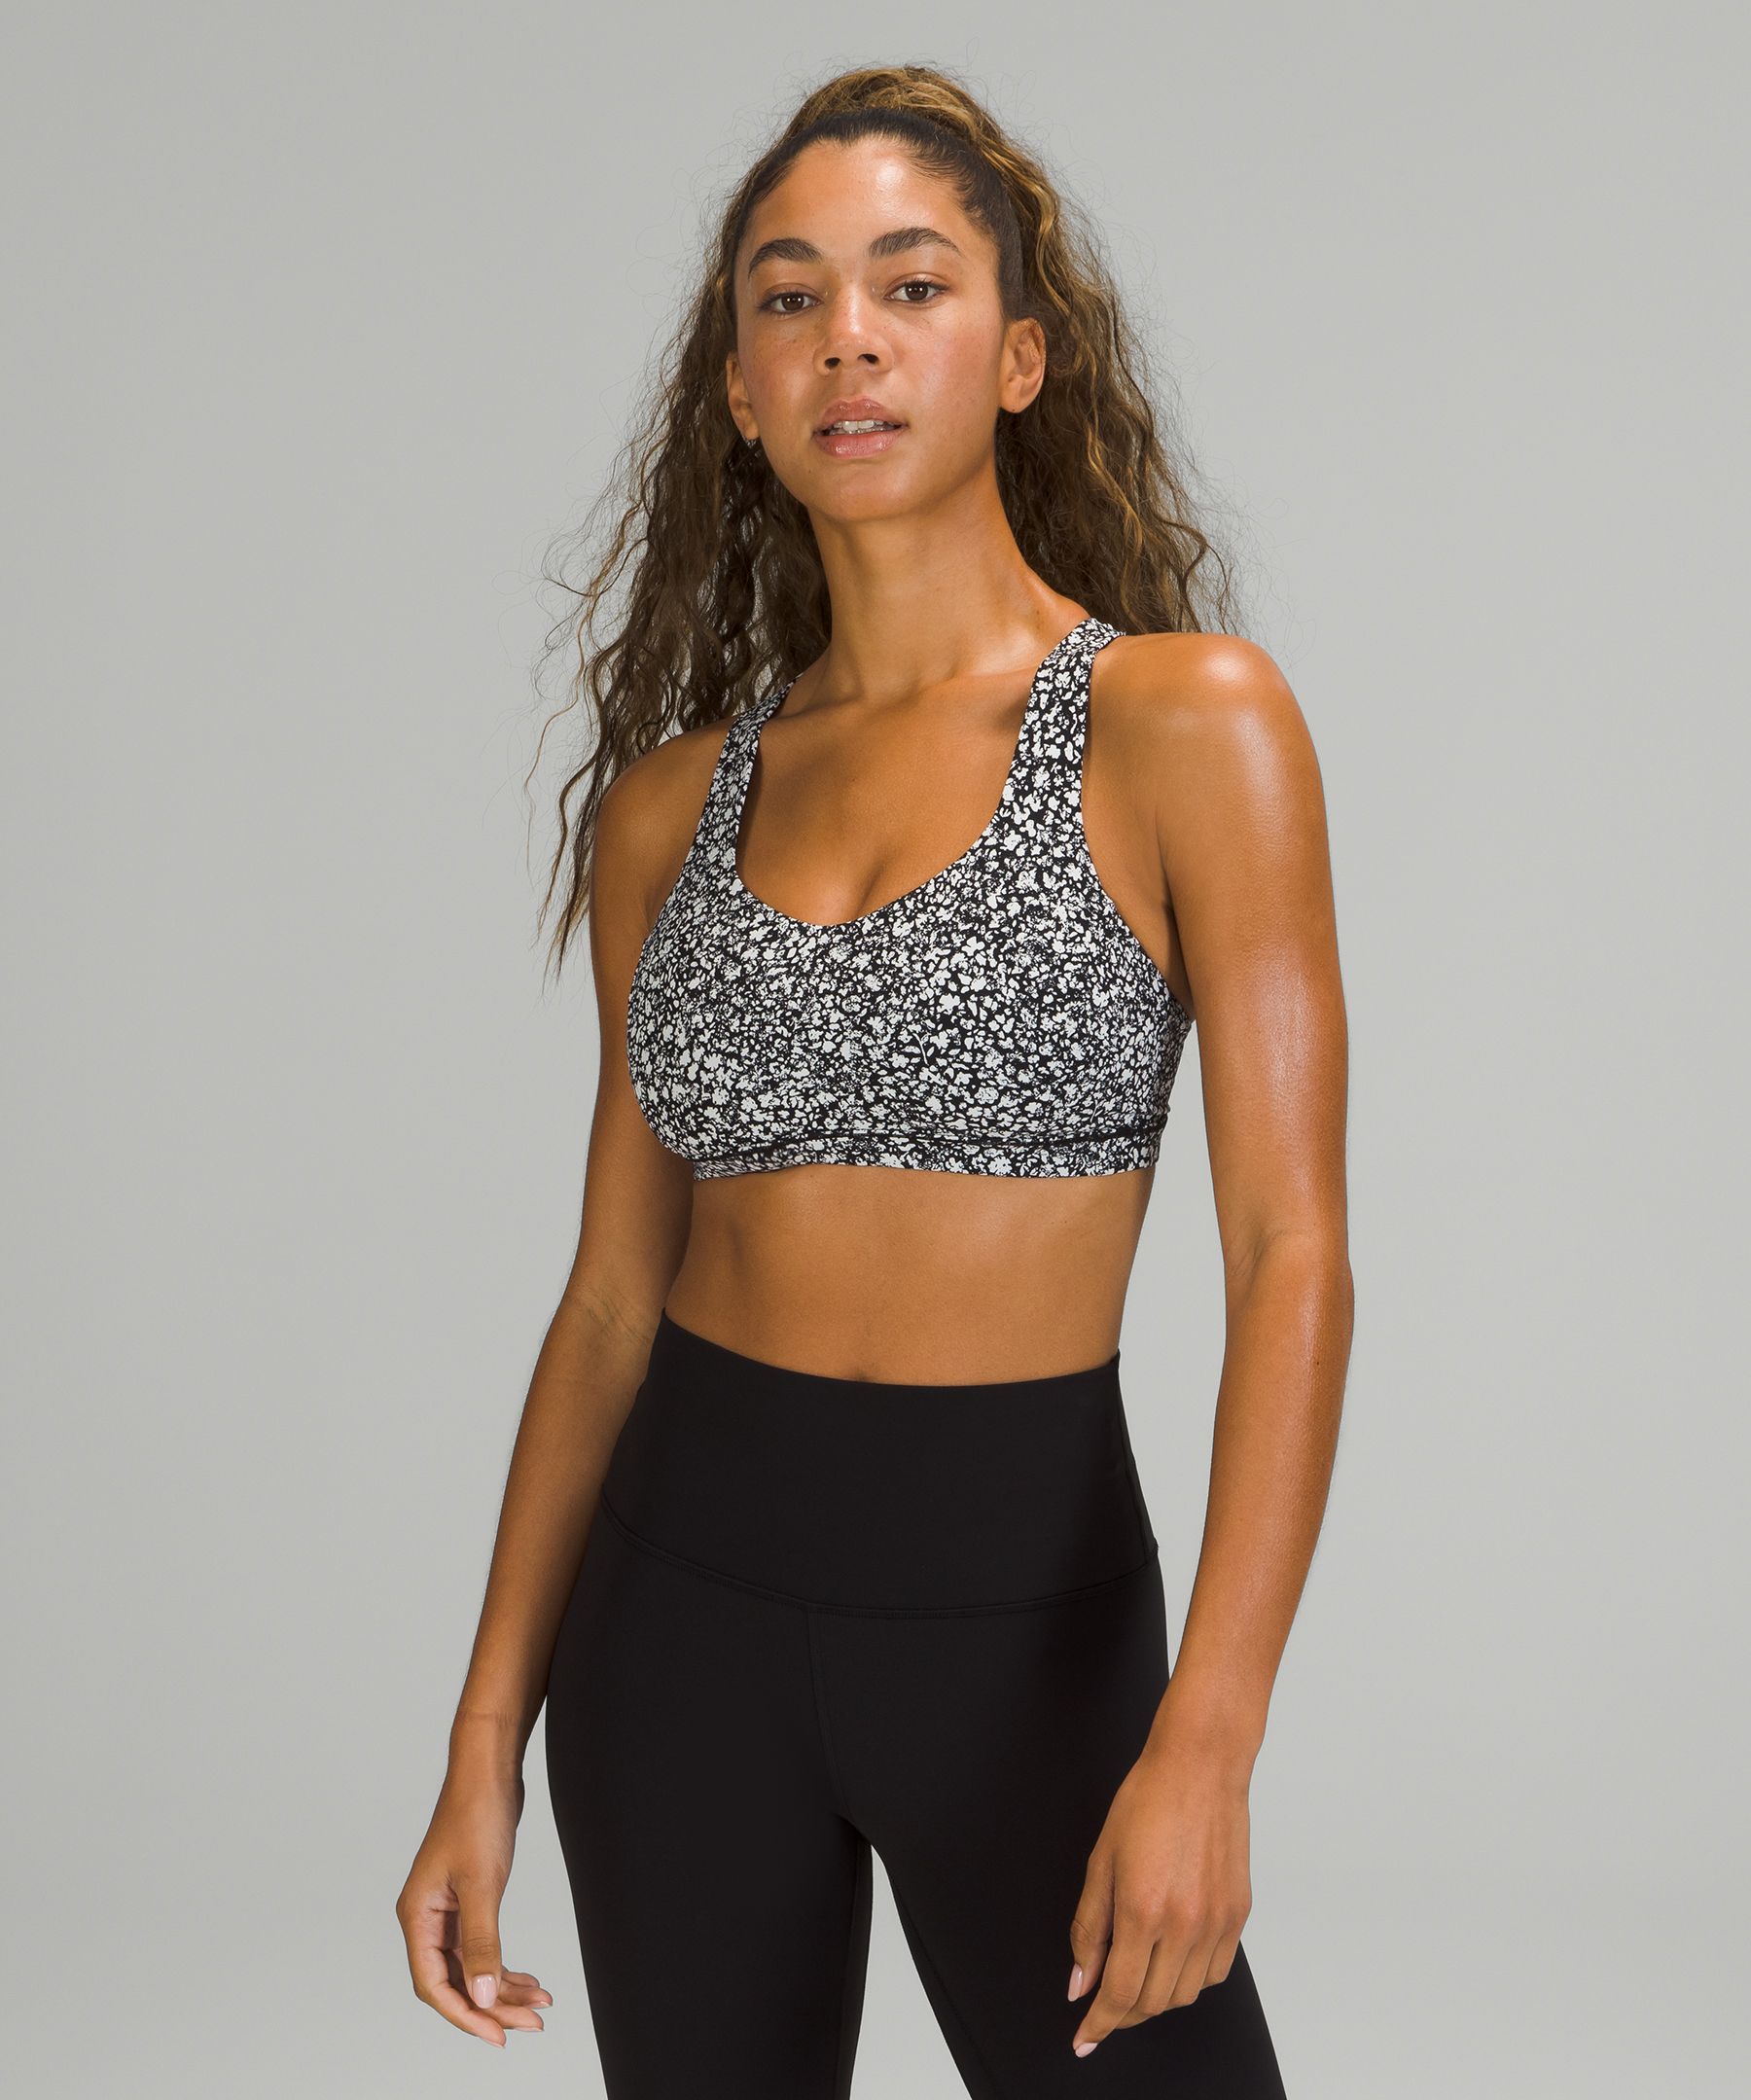 Lululemon Free To Be Serene Bra Light Support, C/d Cup In Venture Floral Alpine White Black/white